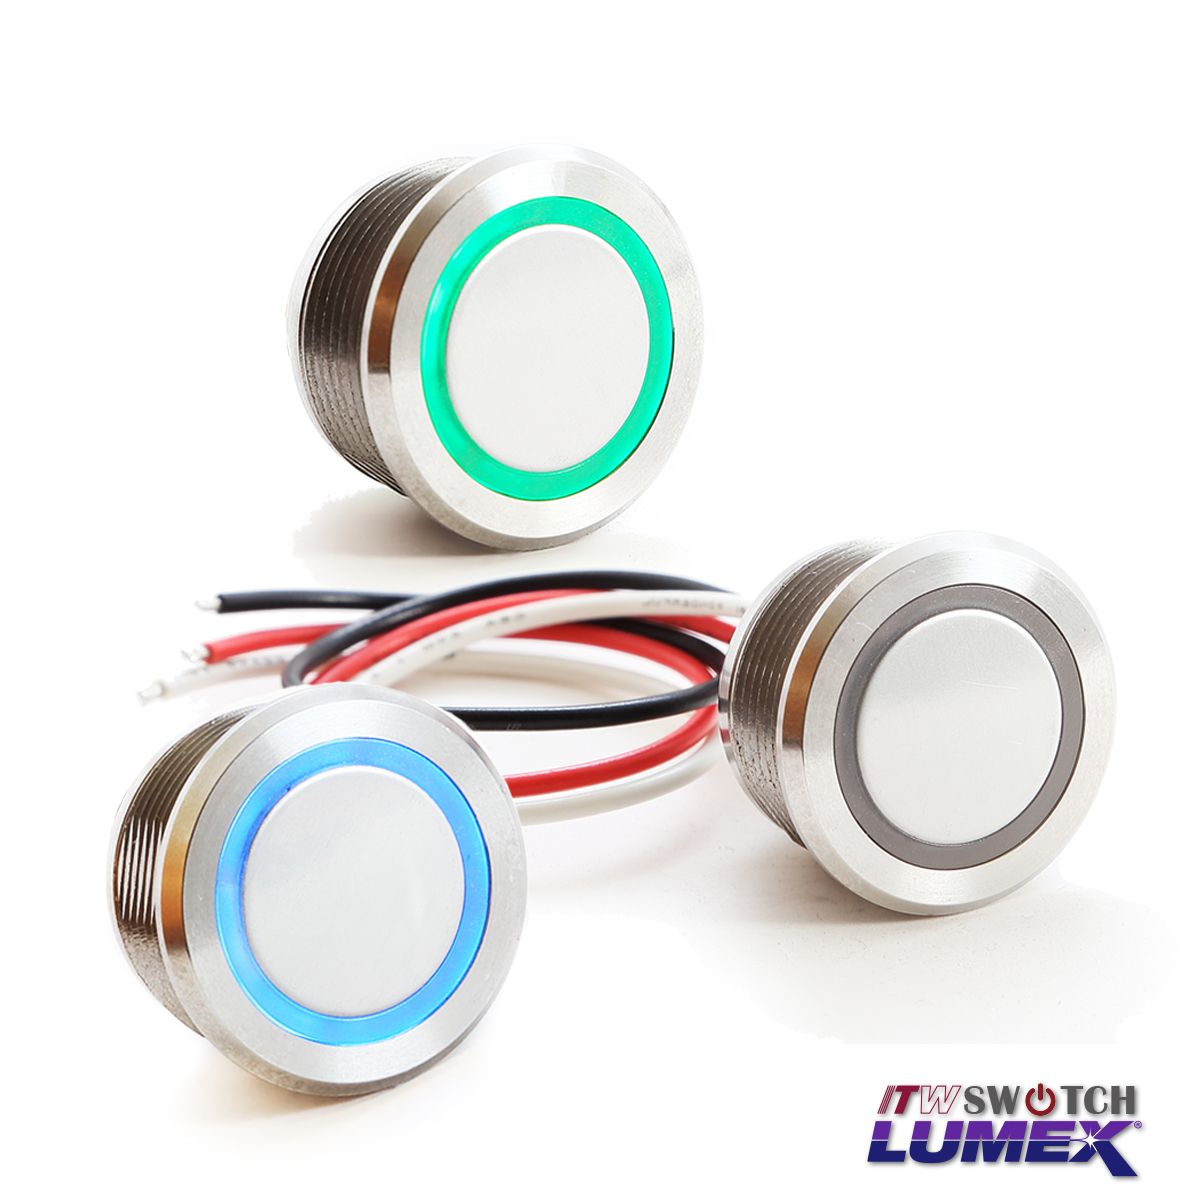 Touch Switches are available through ITW Lumex Switch.